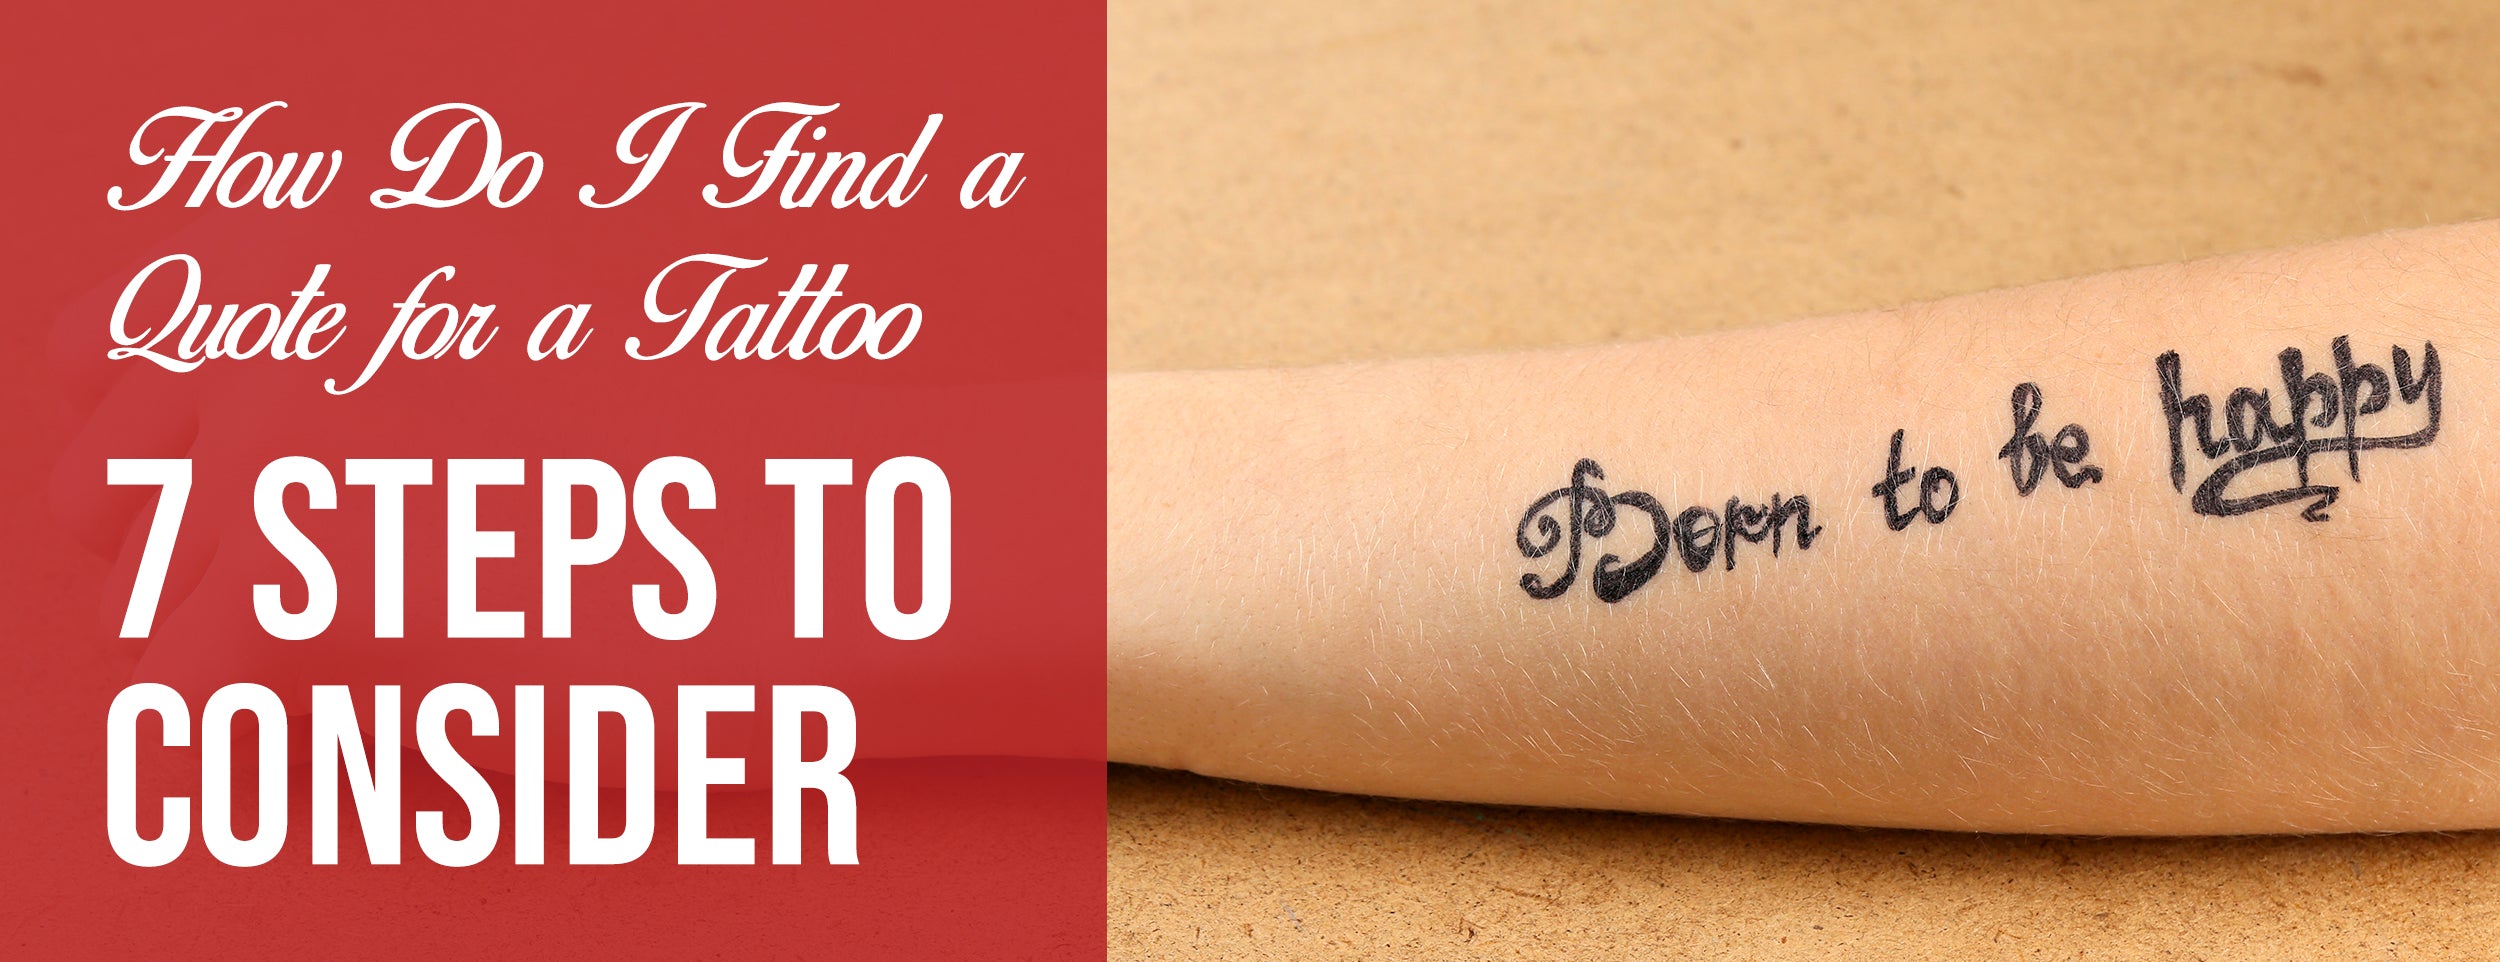 Here are 7 steps to help you find a tattoo quote